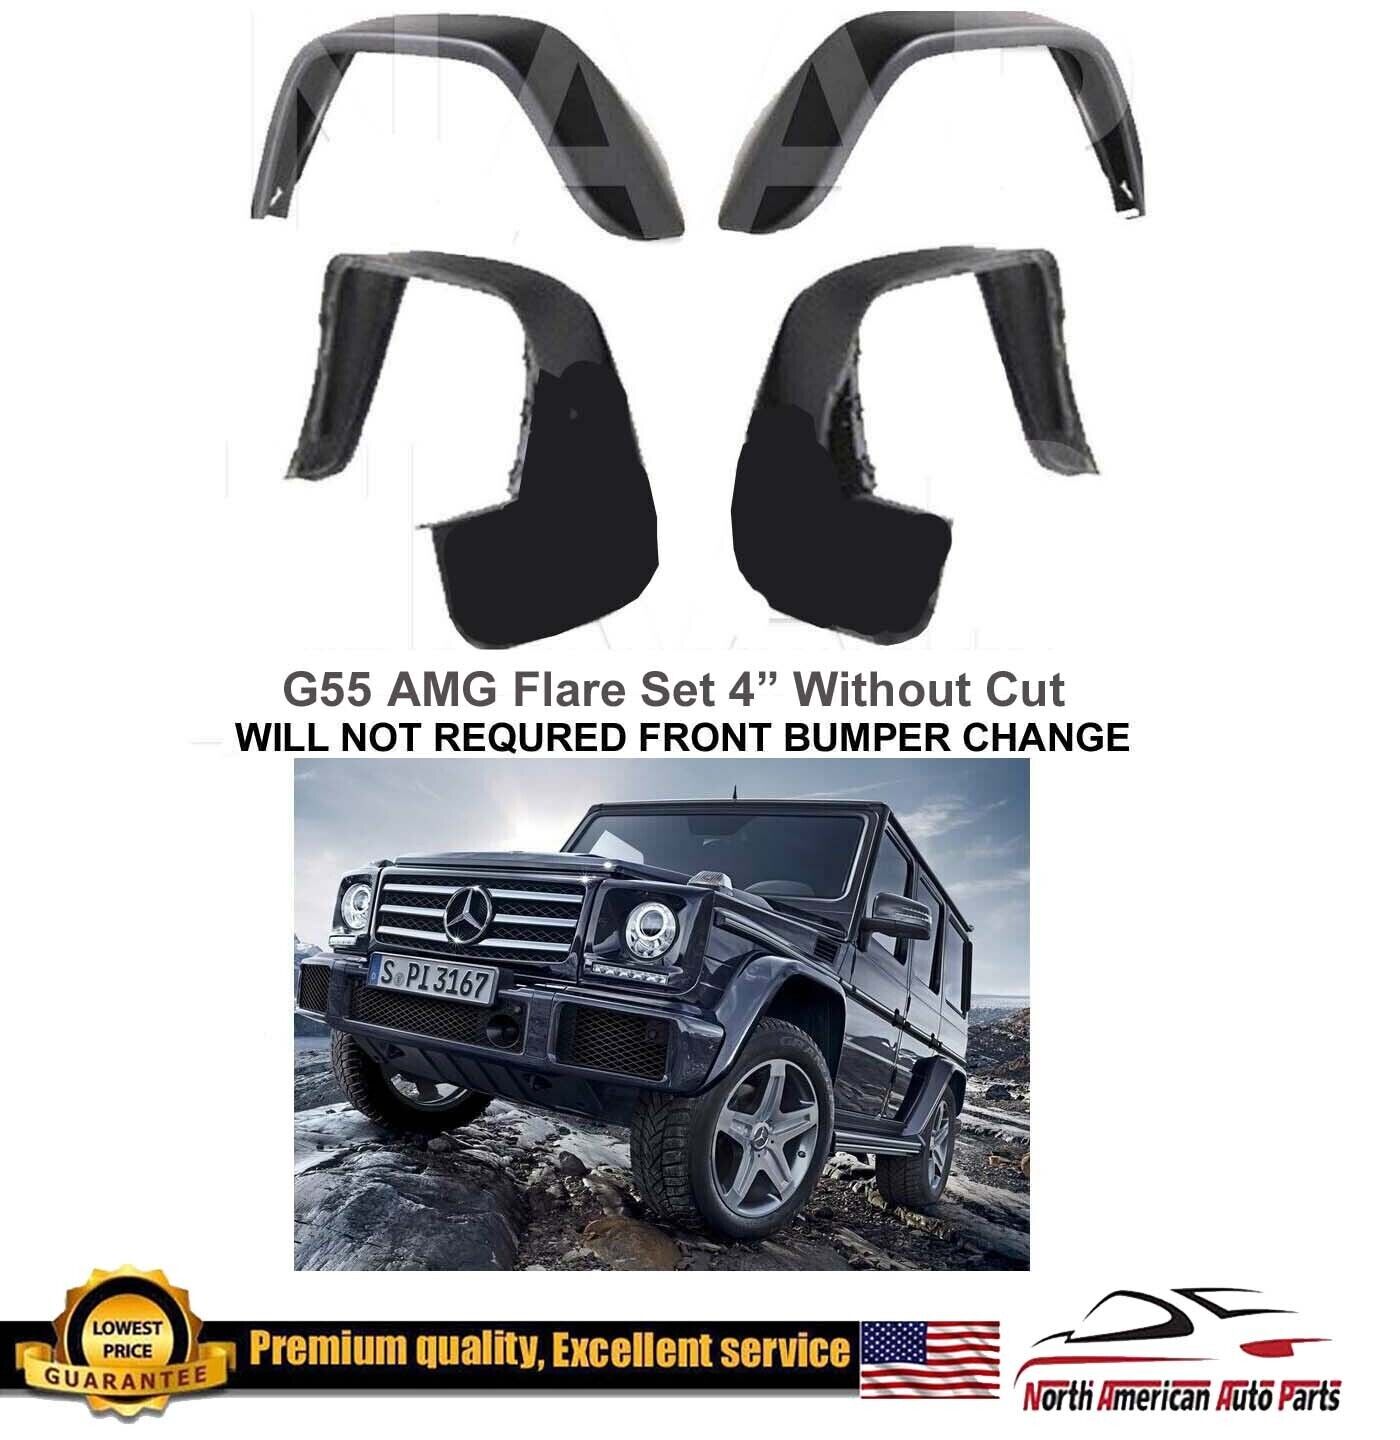 G55 G500 AMG fender flares WITHOUT CUT G-Wagon Body Kit No need Bumper Upgrade